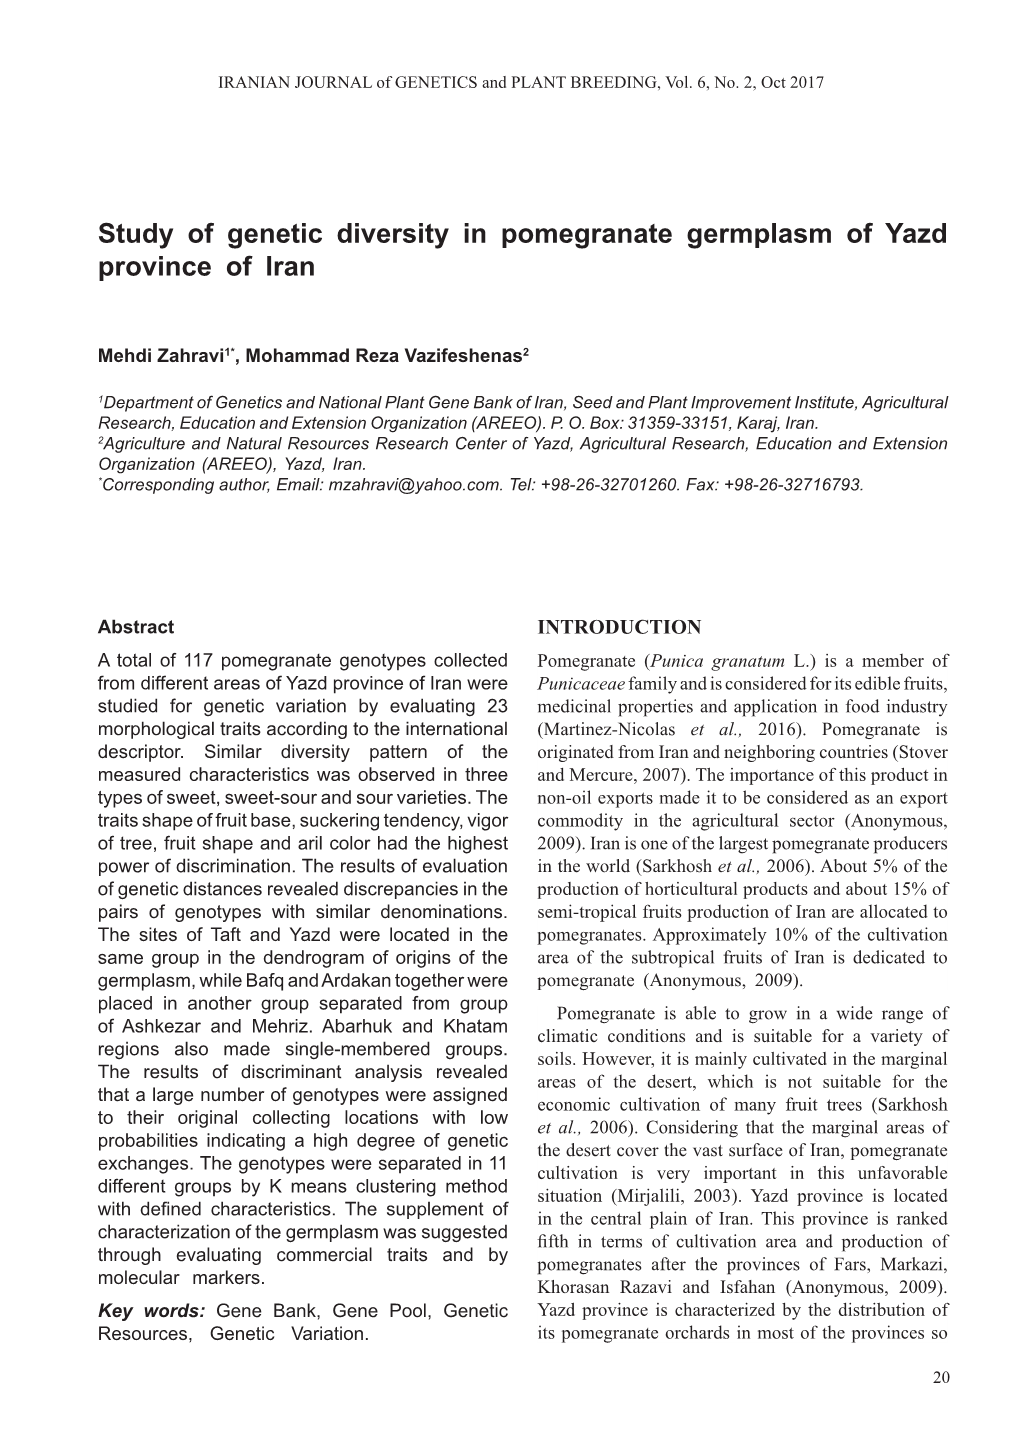 Study of Genetic Diversity in Pomegranate Germplasm of Yazd Province of Iran